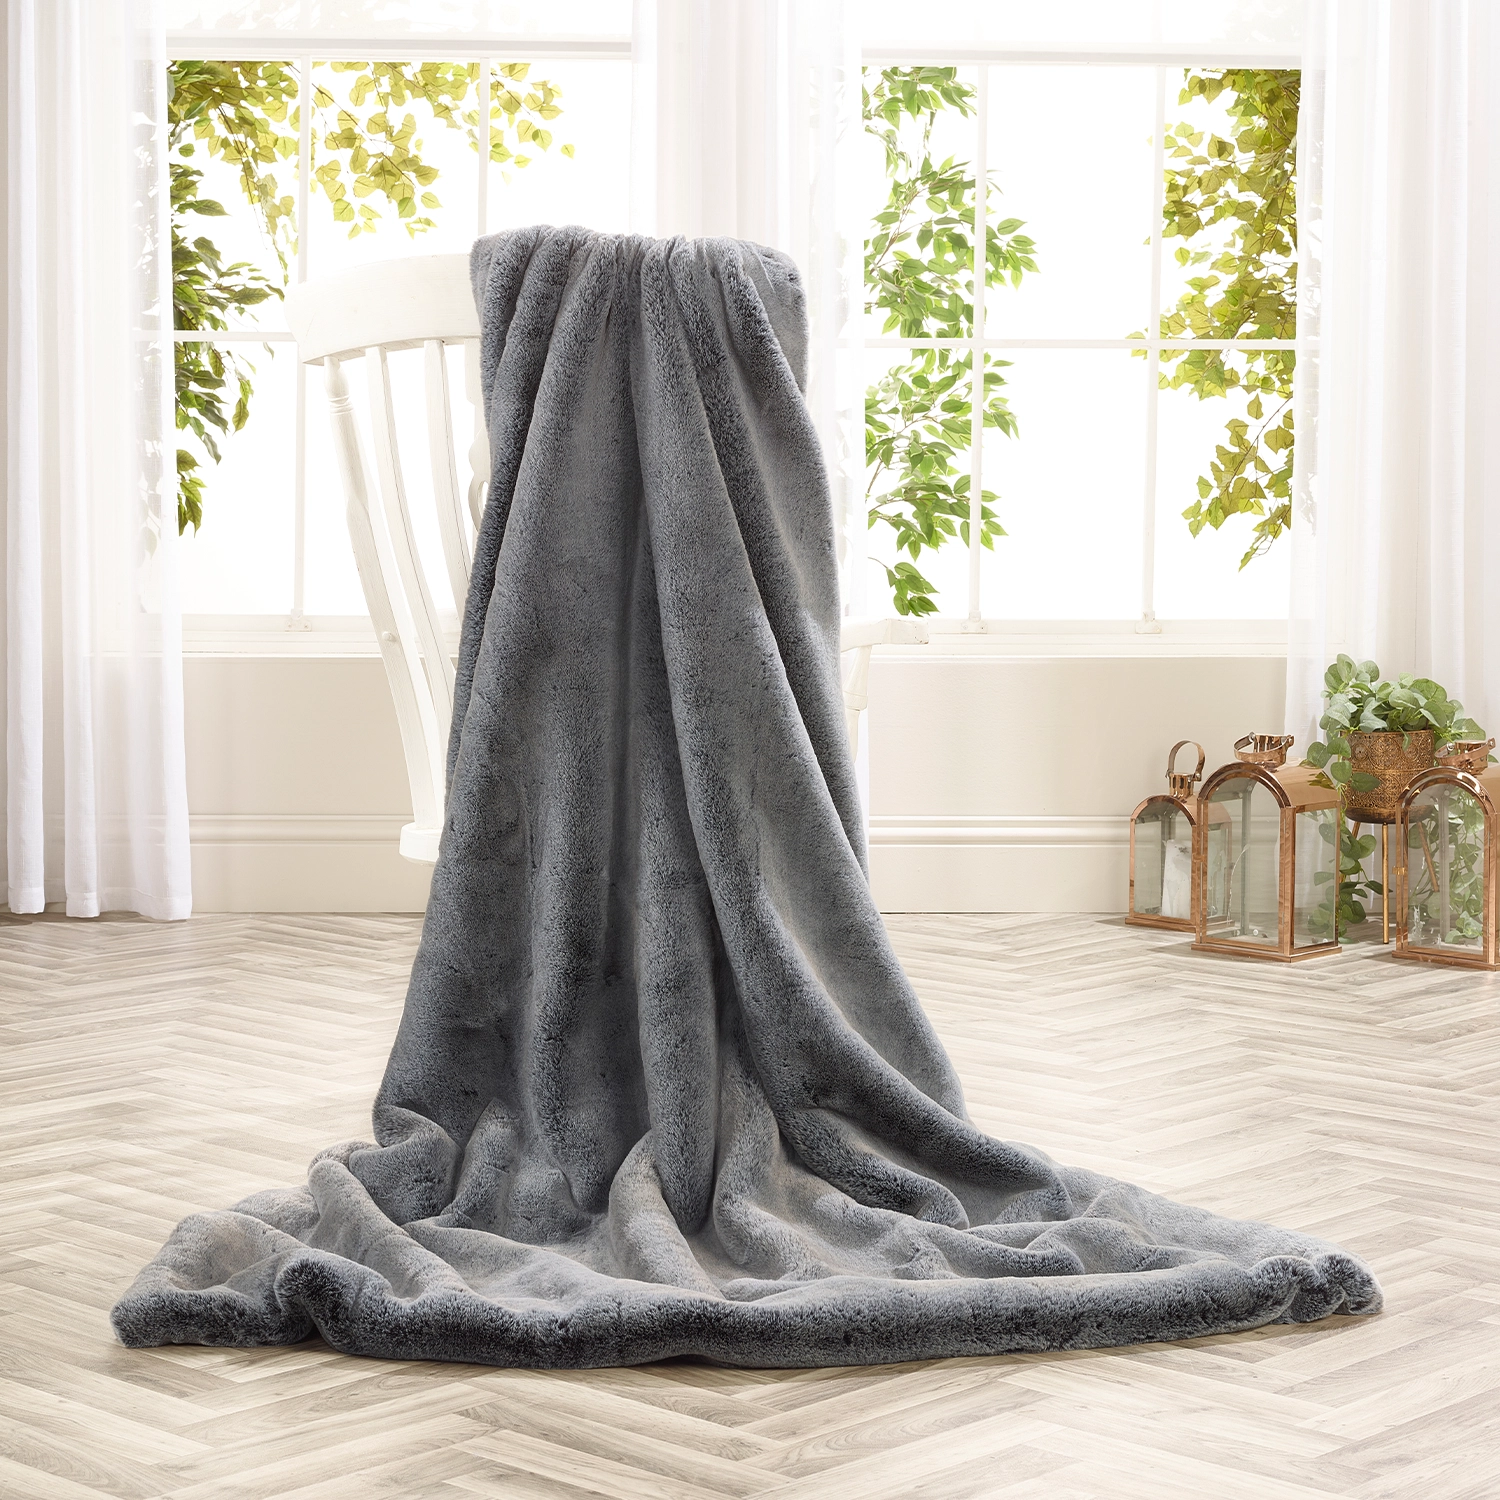 Frosted Gun Metal Luxury Faux Fur Throw and Cushions